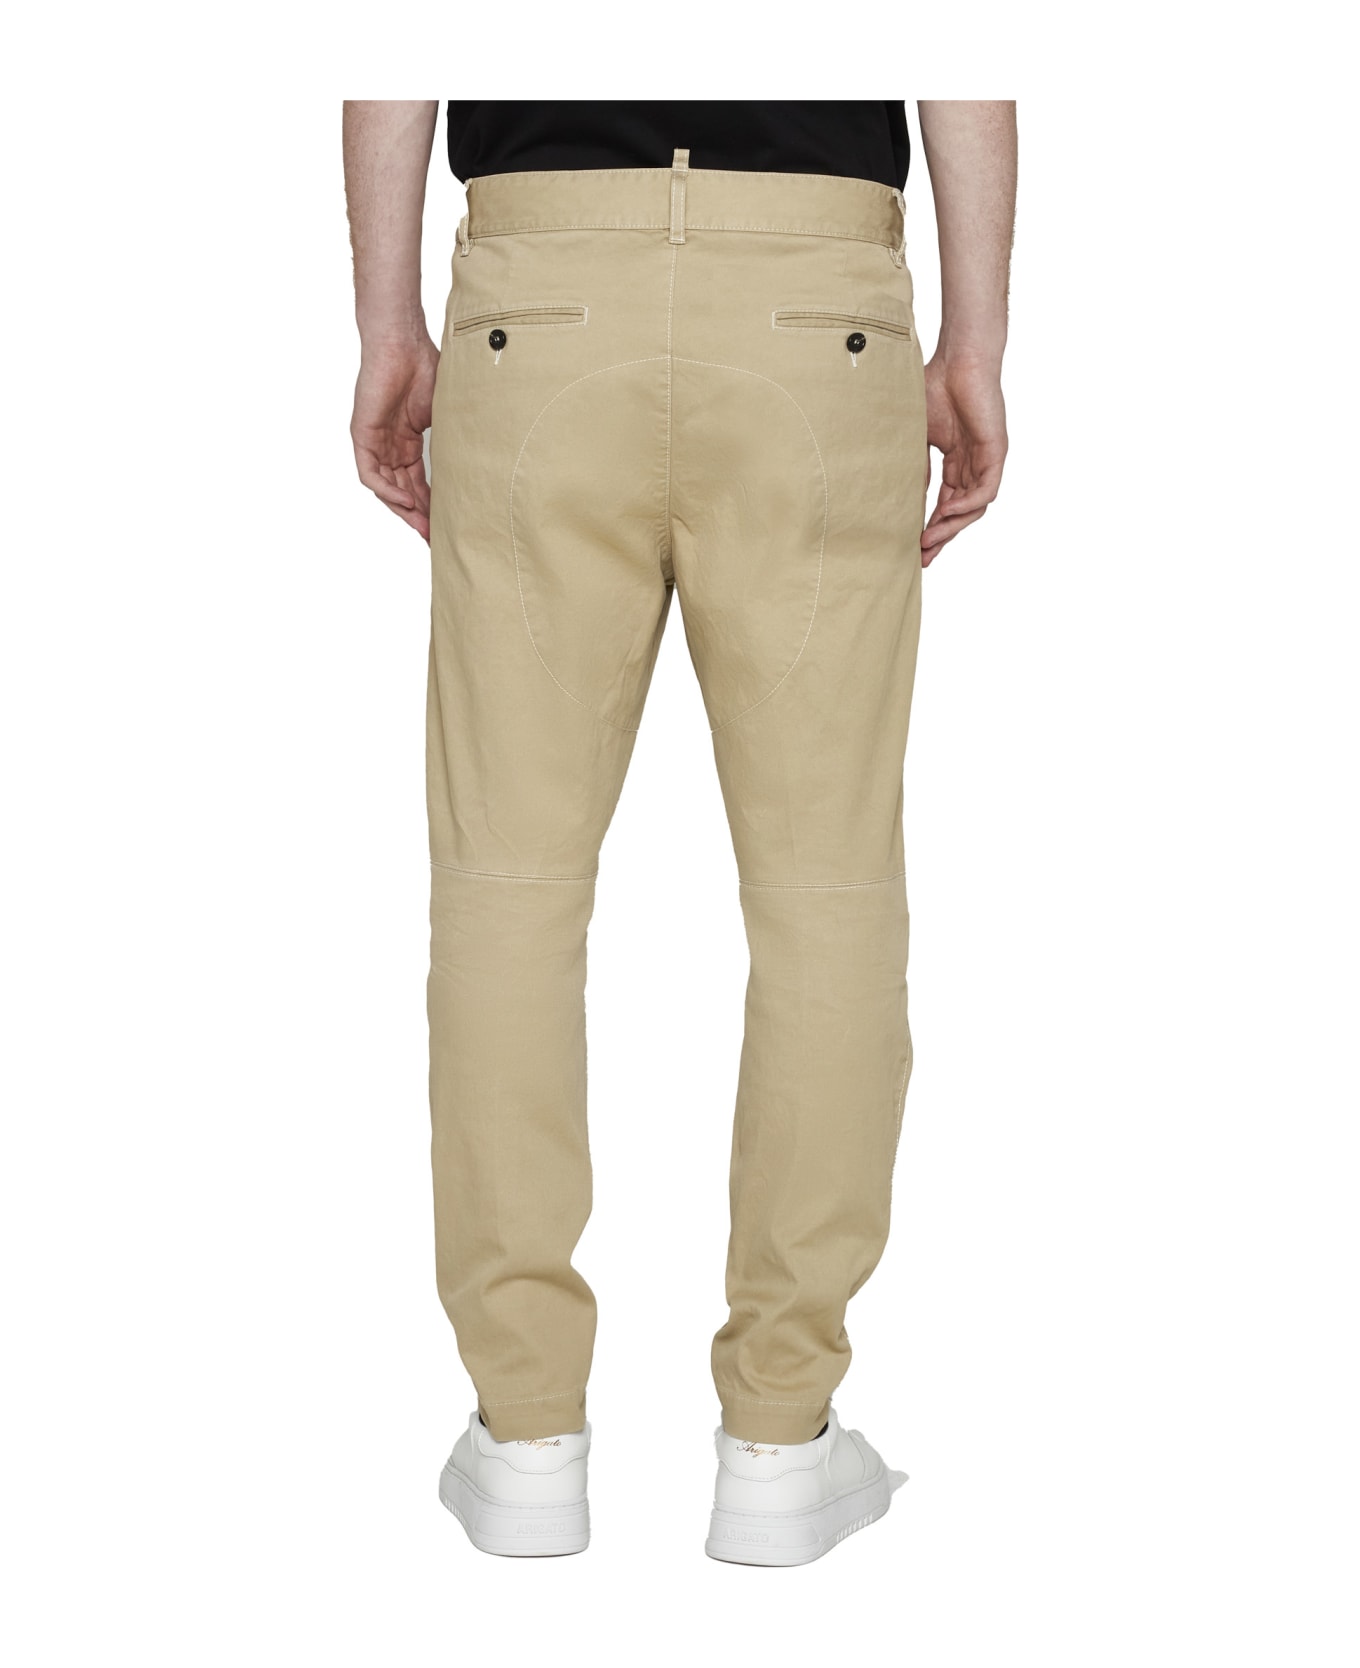 Dsquared2 Buttoned Zip Chino Trousers - Nude & Neutrals